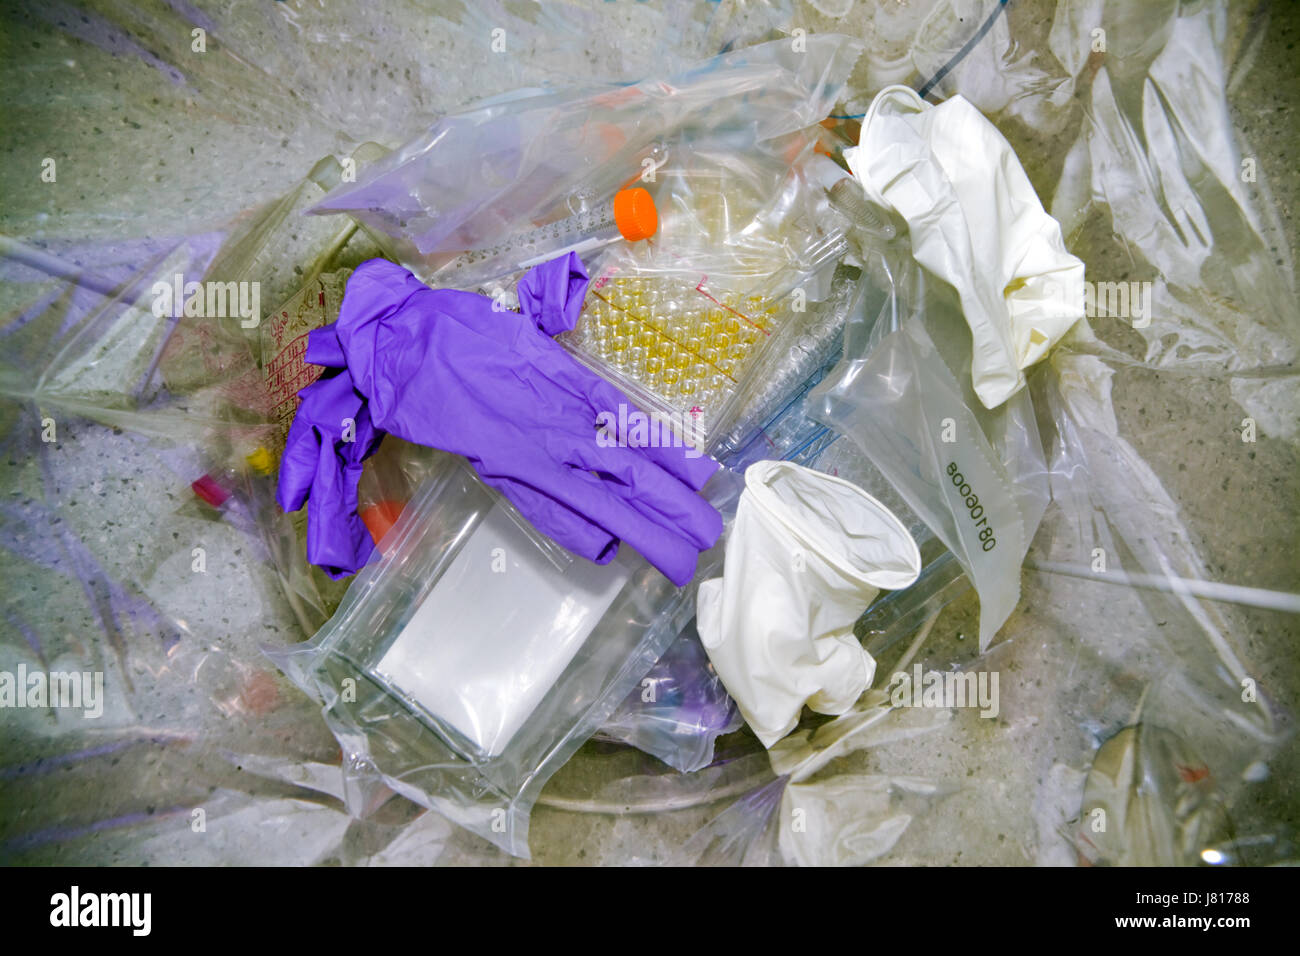 Clinical waste in a laboratory trash bag. Discarded material in waste bin of a UK biomedical laboratory for disposal by incineration Stock Photo